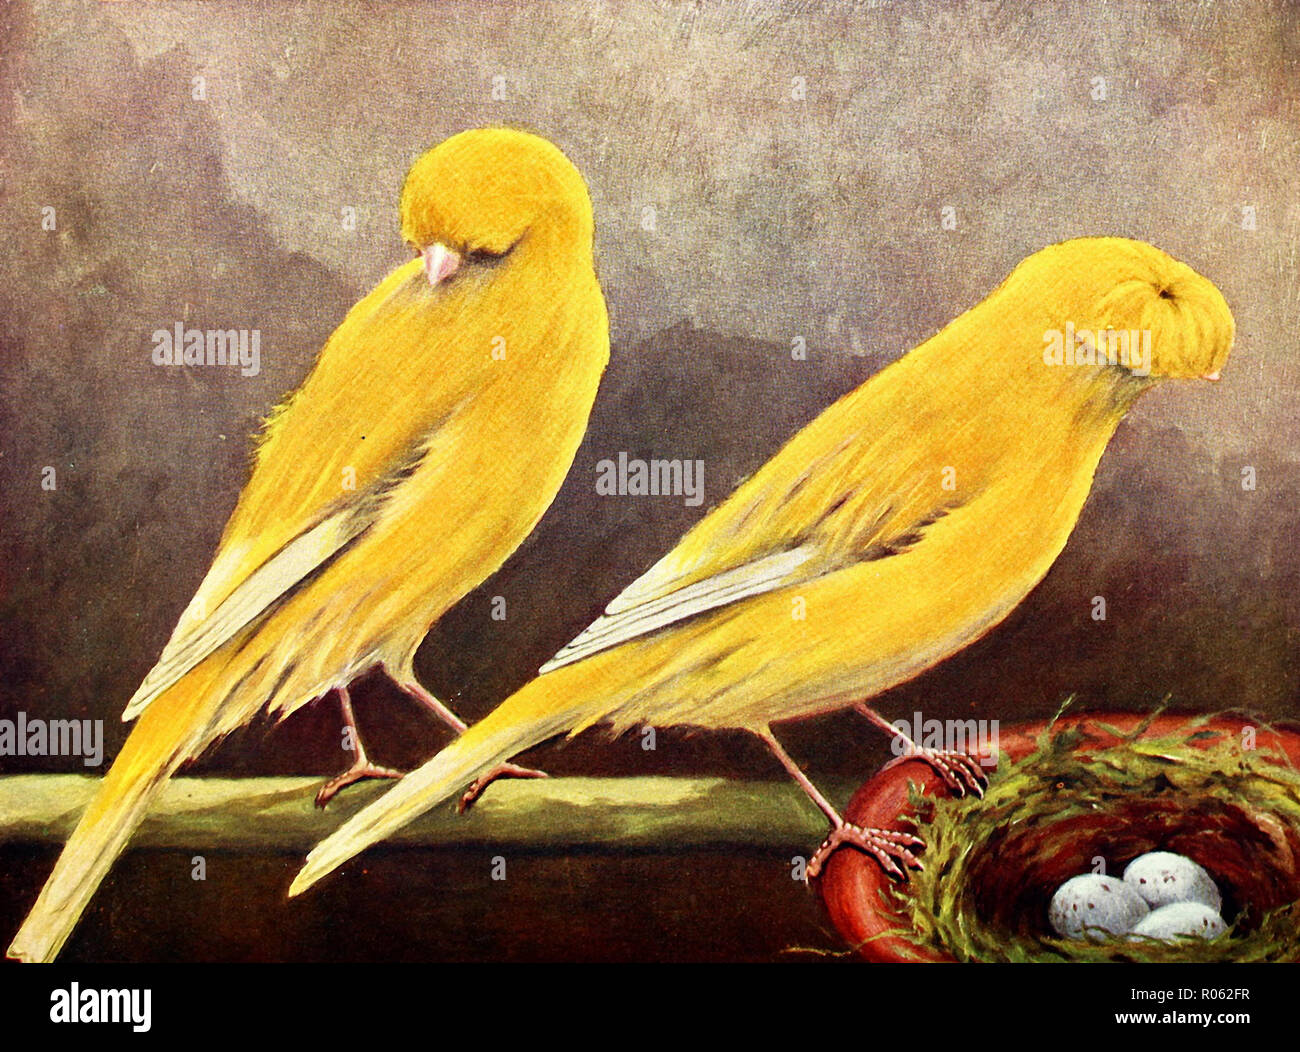 Clear Yellow Crest-Bred and Crested Canaries Stock Photo